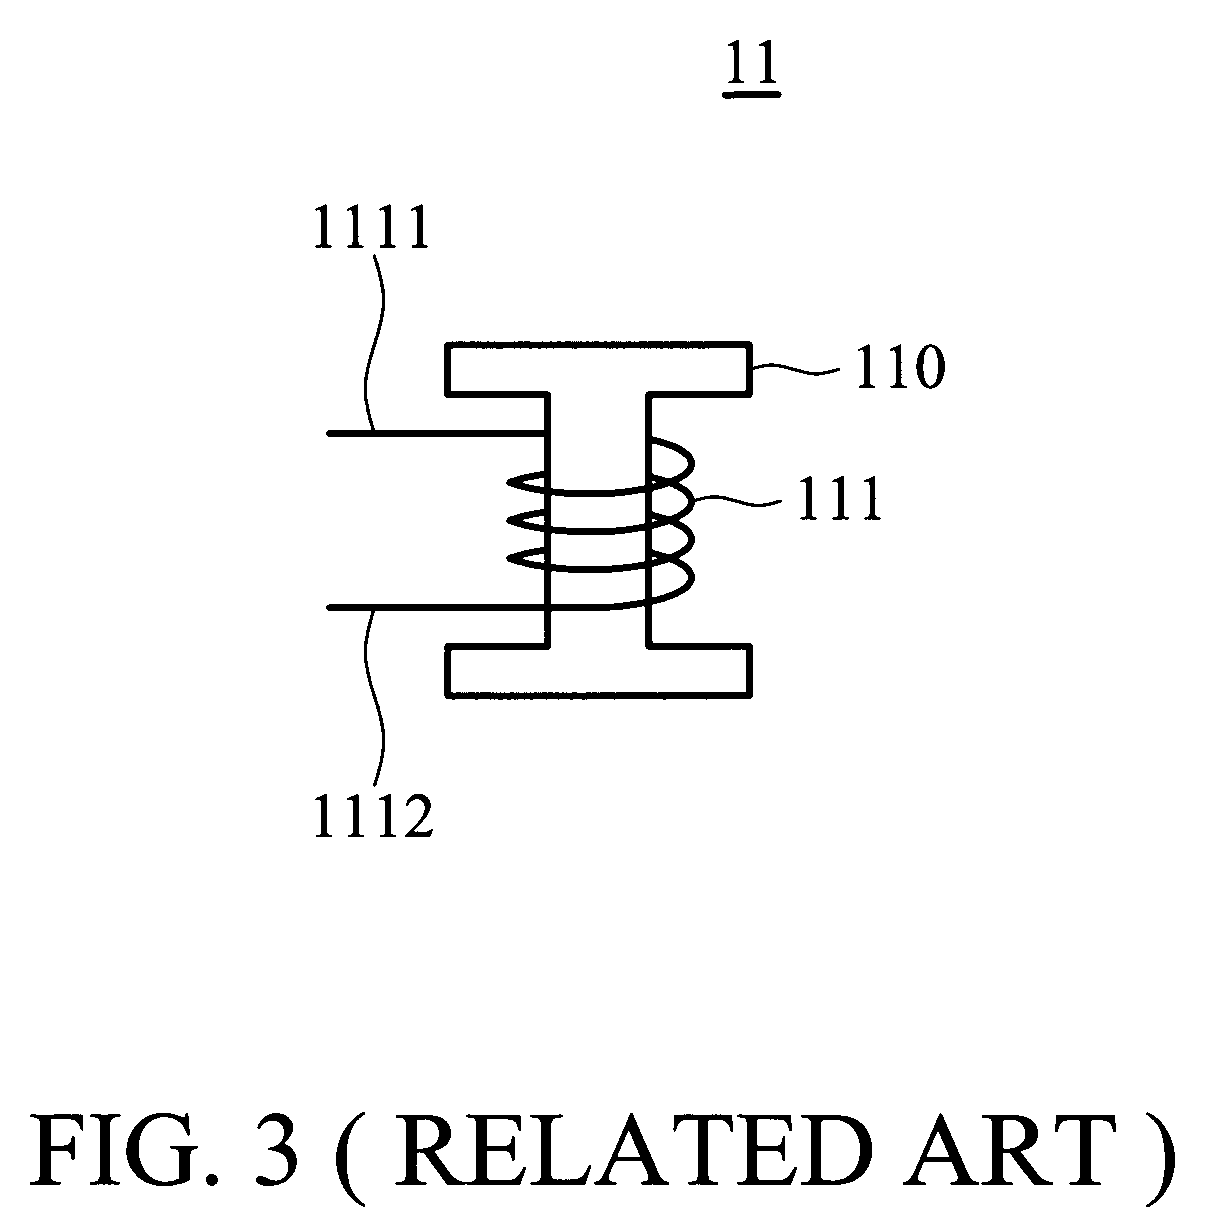 Electromagnetic interference filter